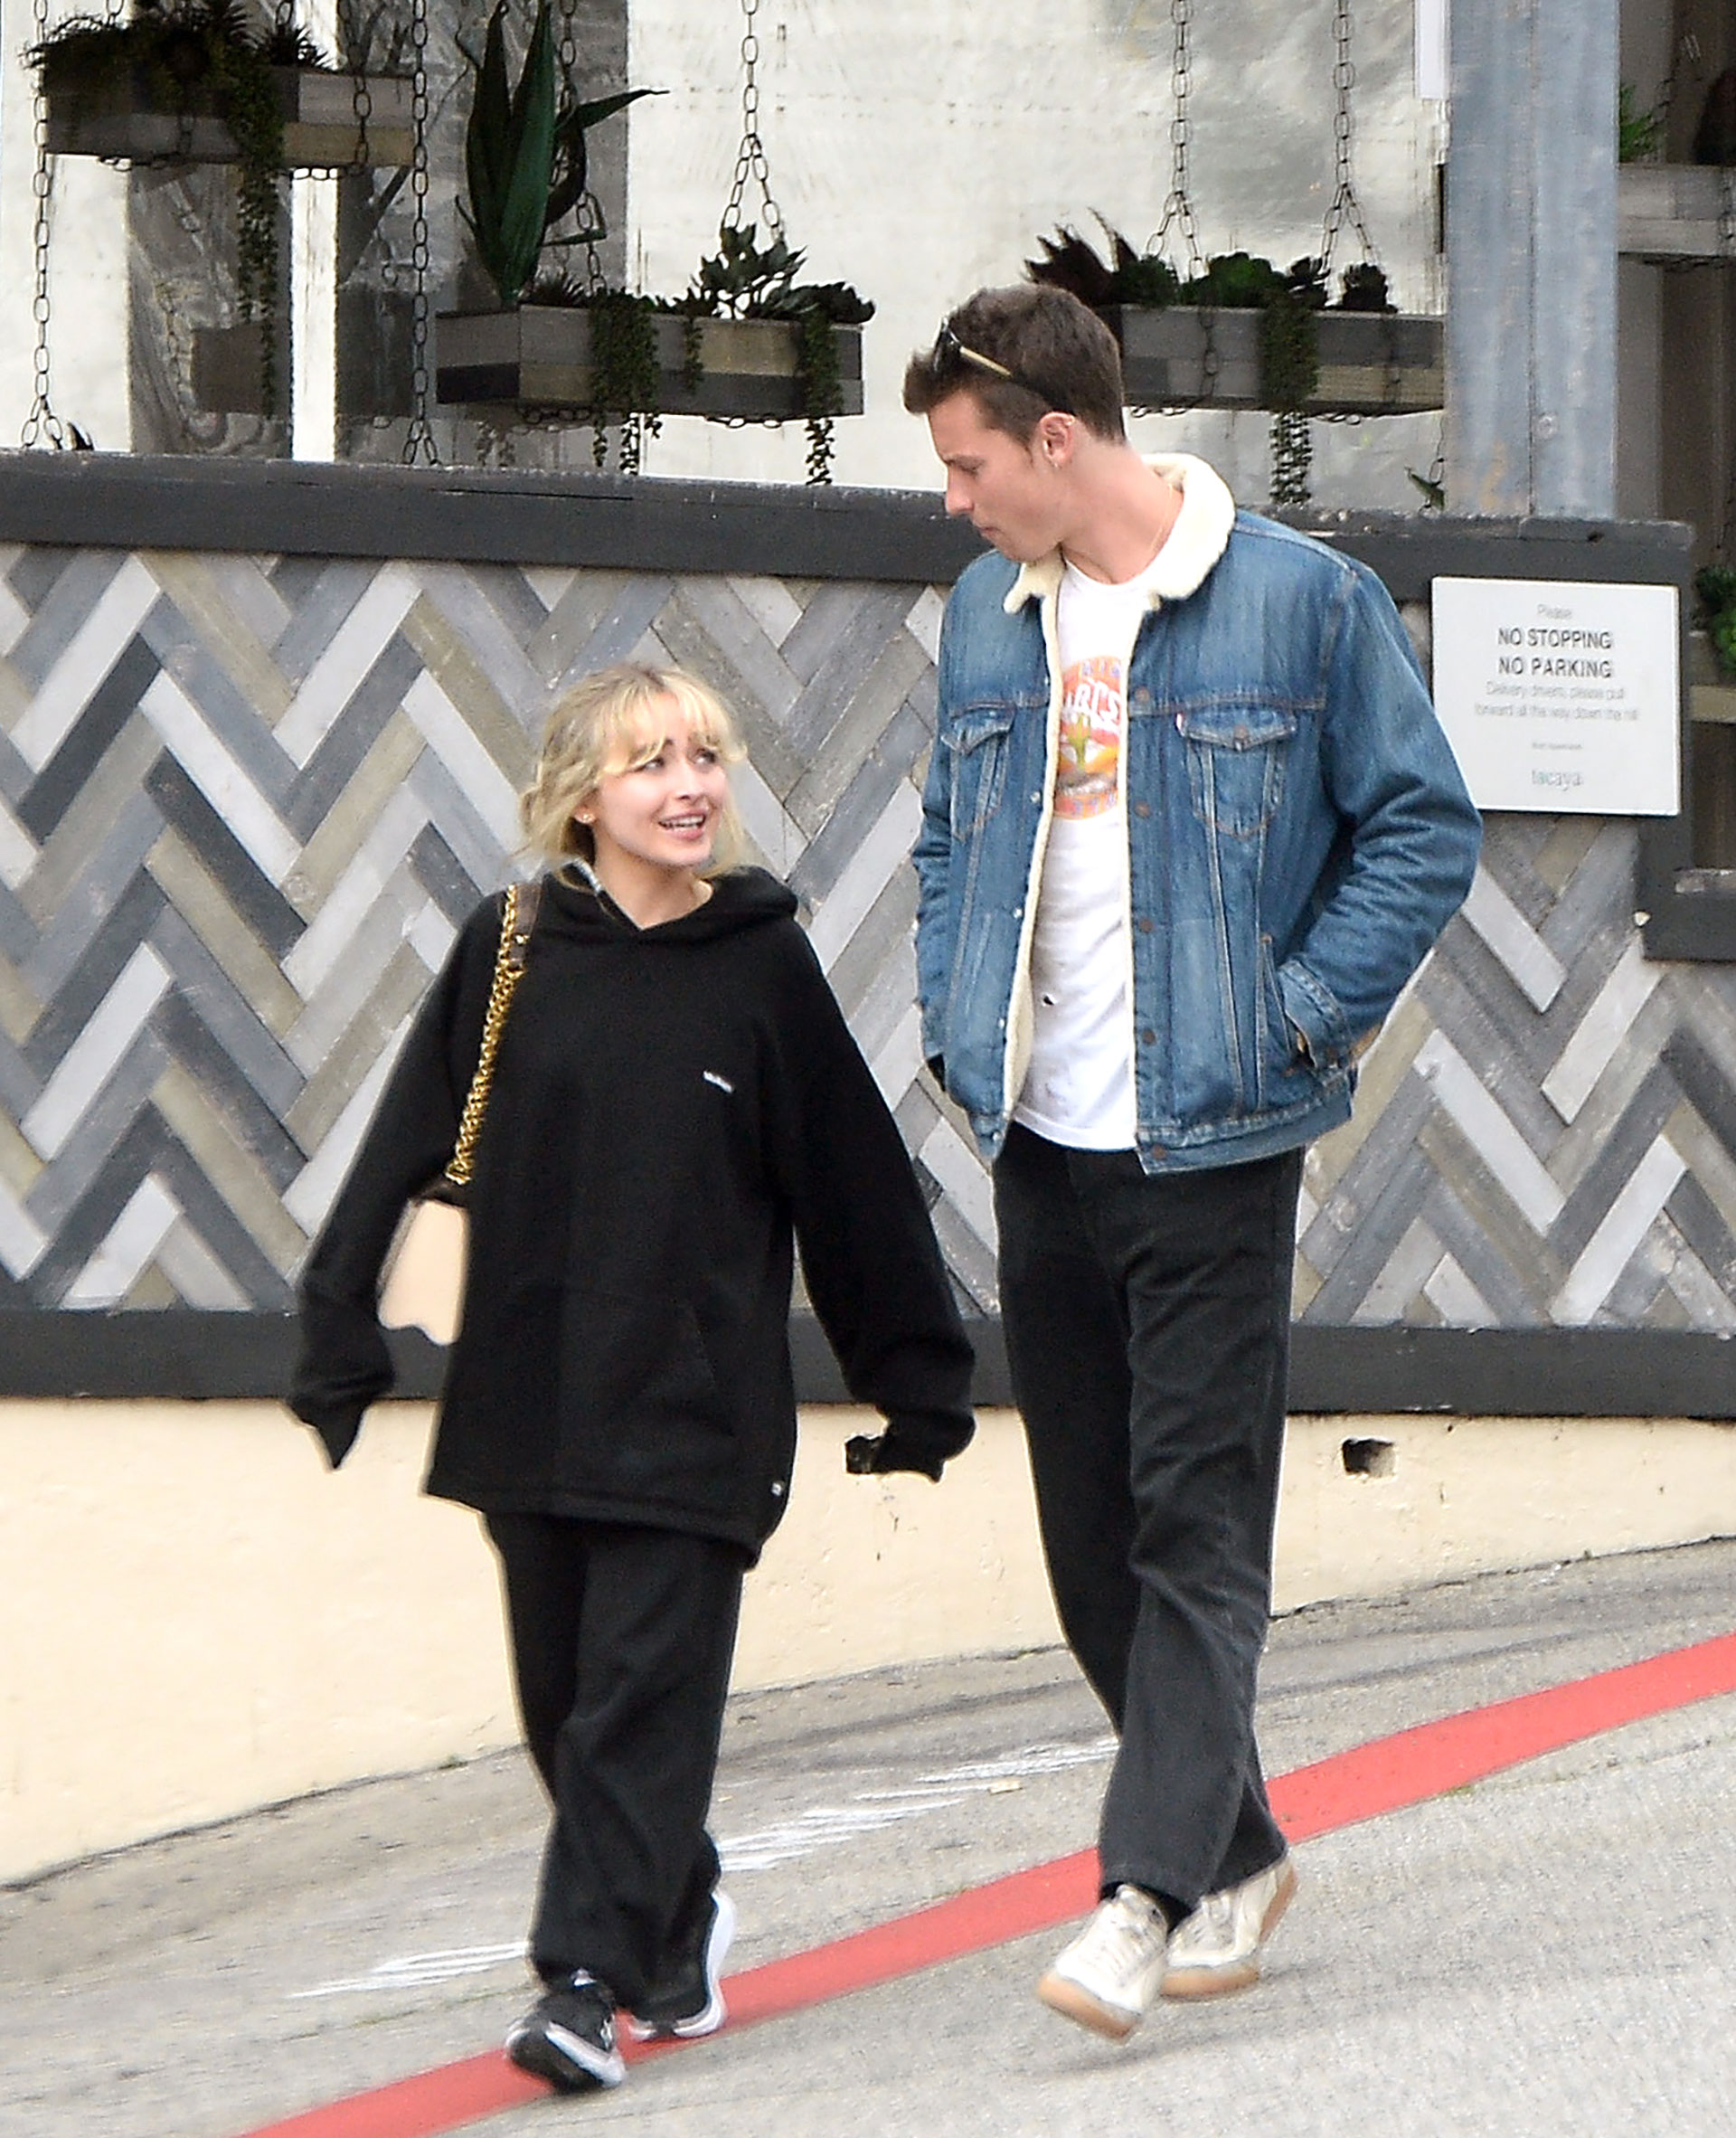 Shawn Mendes and Sabrina Carpenter were photographed while sharing a walk through the streets of Los Angeles.  She wore a black set of oversized pants and a jumpsuit that she combined with sneakers and a light-colored bag, while he wore black jeans, a printed t-shirt, and a jean jacket with synthetic lambskin inside